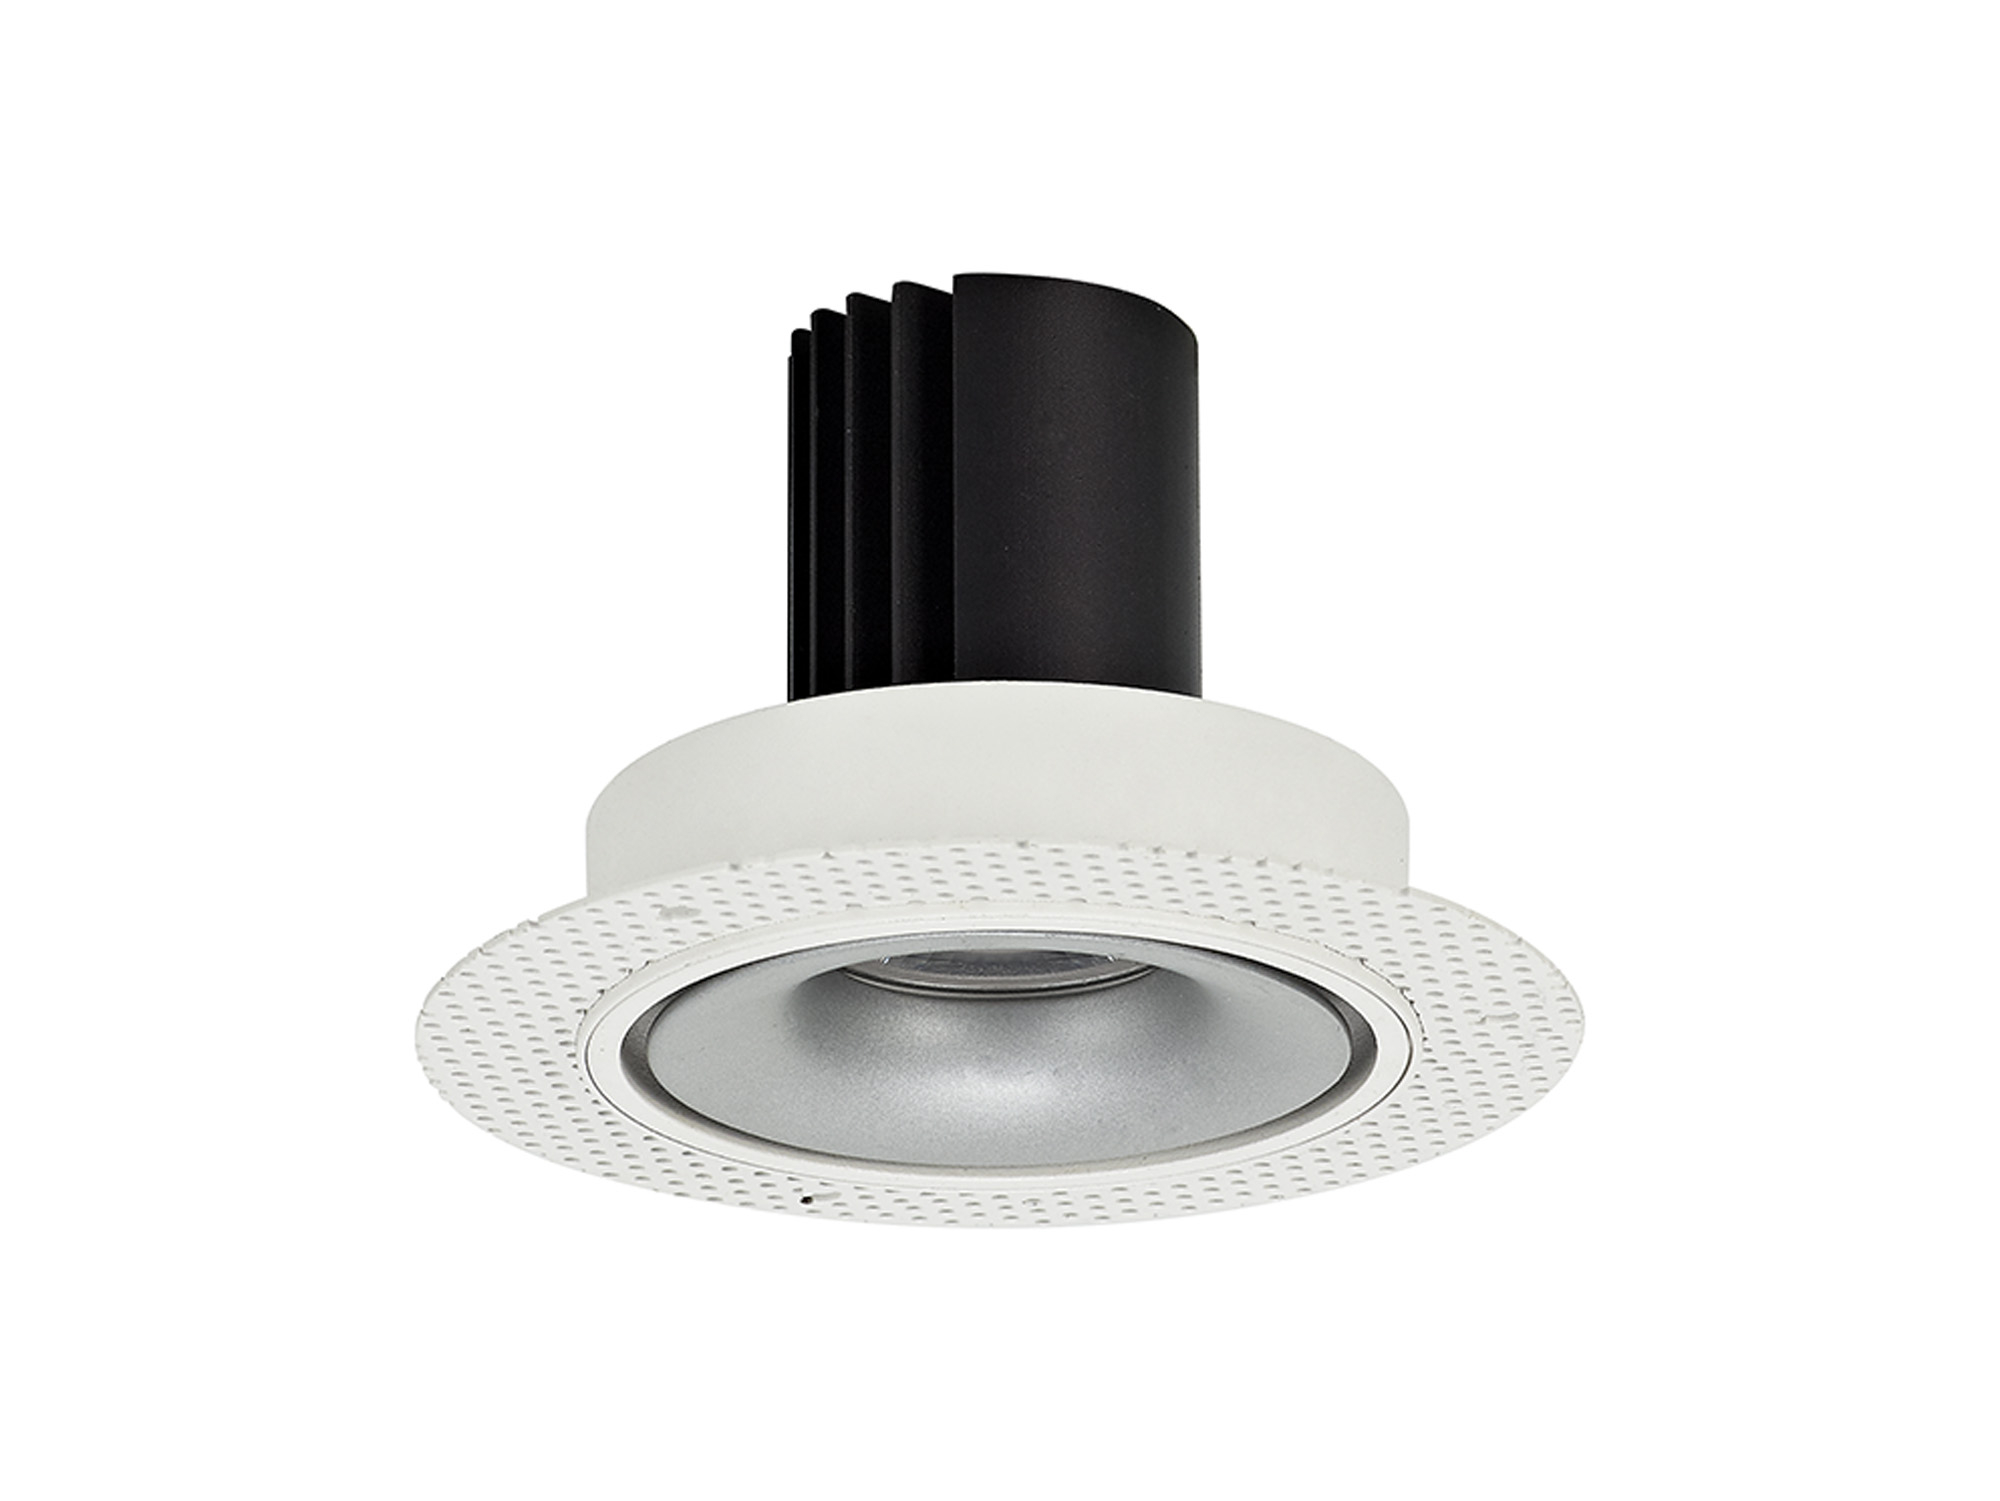 DM202189  Bolor T 12 Tridonic Powered 12W 2700K 1200lm 12° CRI>90 LED Engine White/Silver Trimless Fixed Recessed Spotlight, IP20